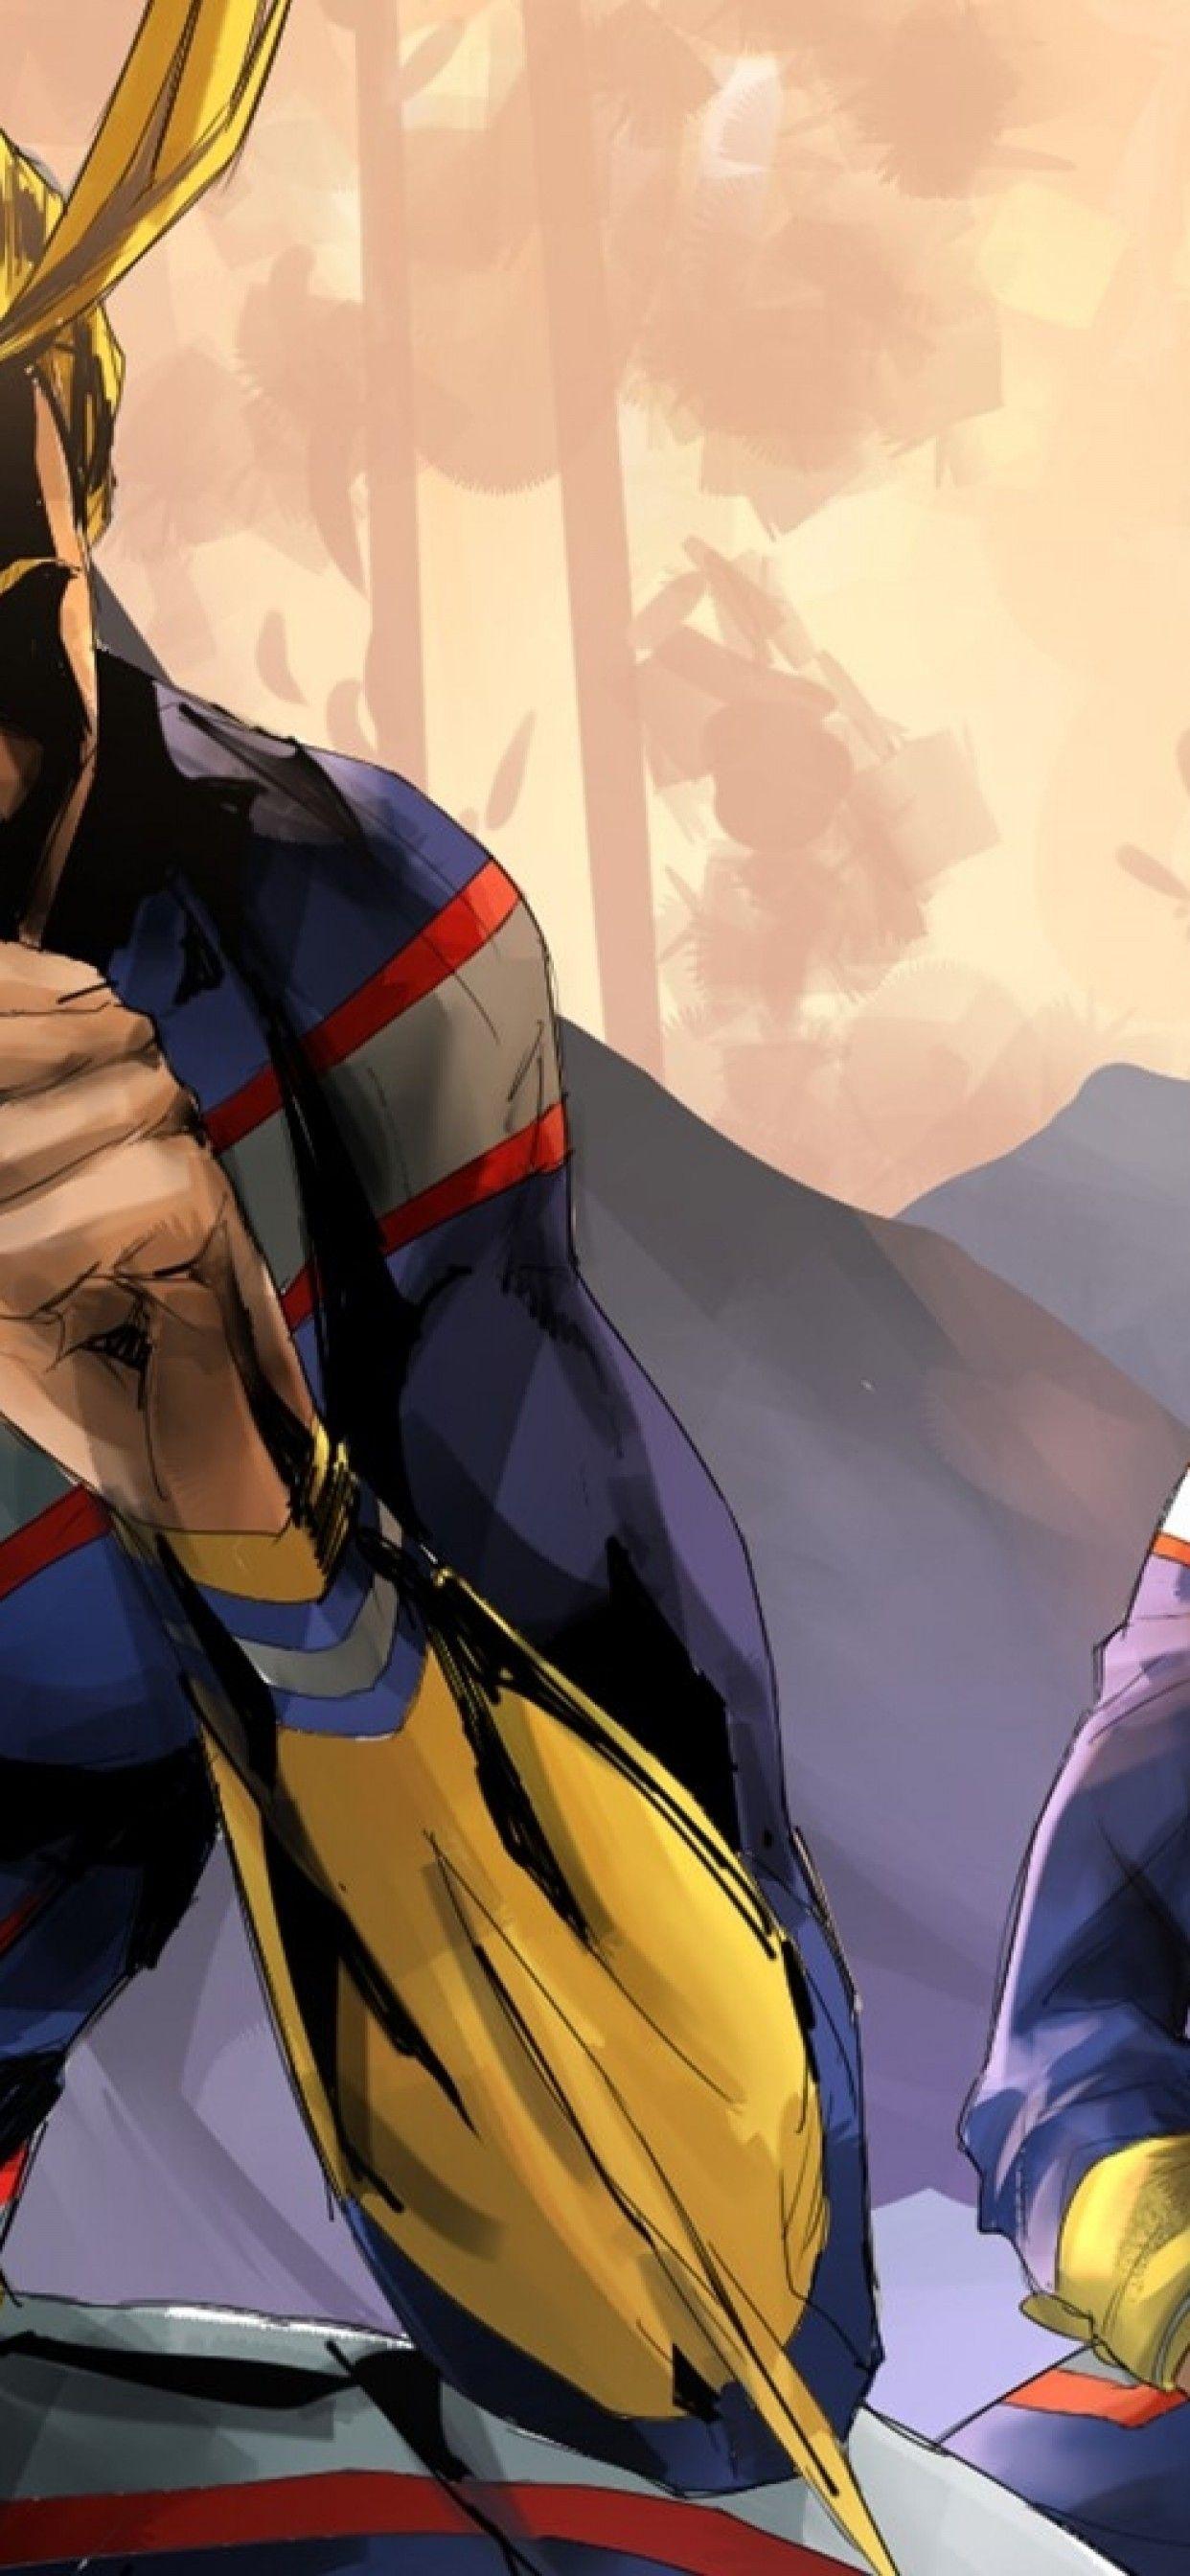 All Might Punch 4K wallpaper download